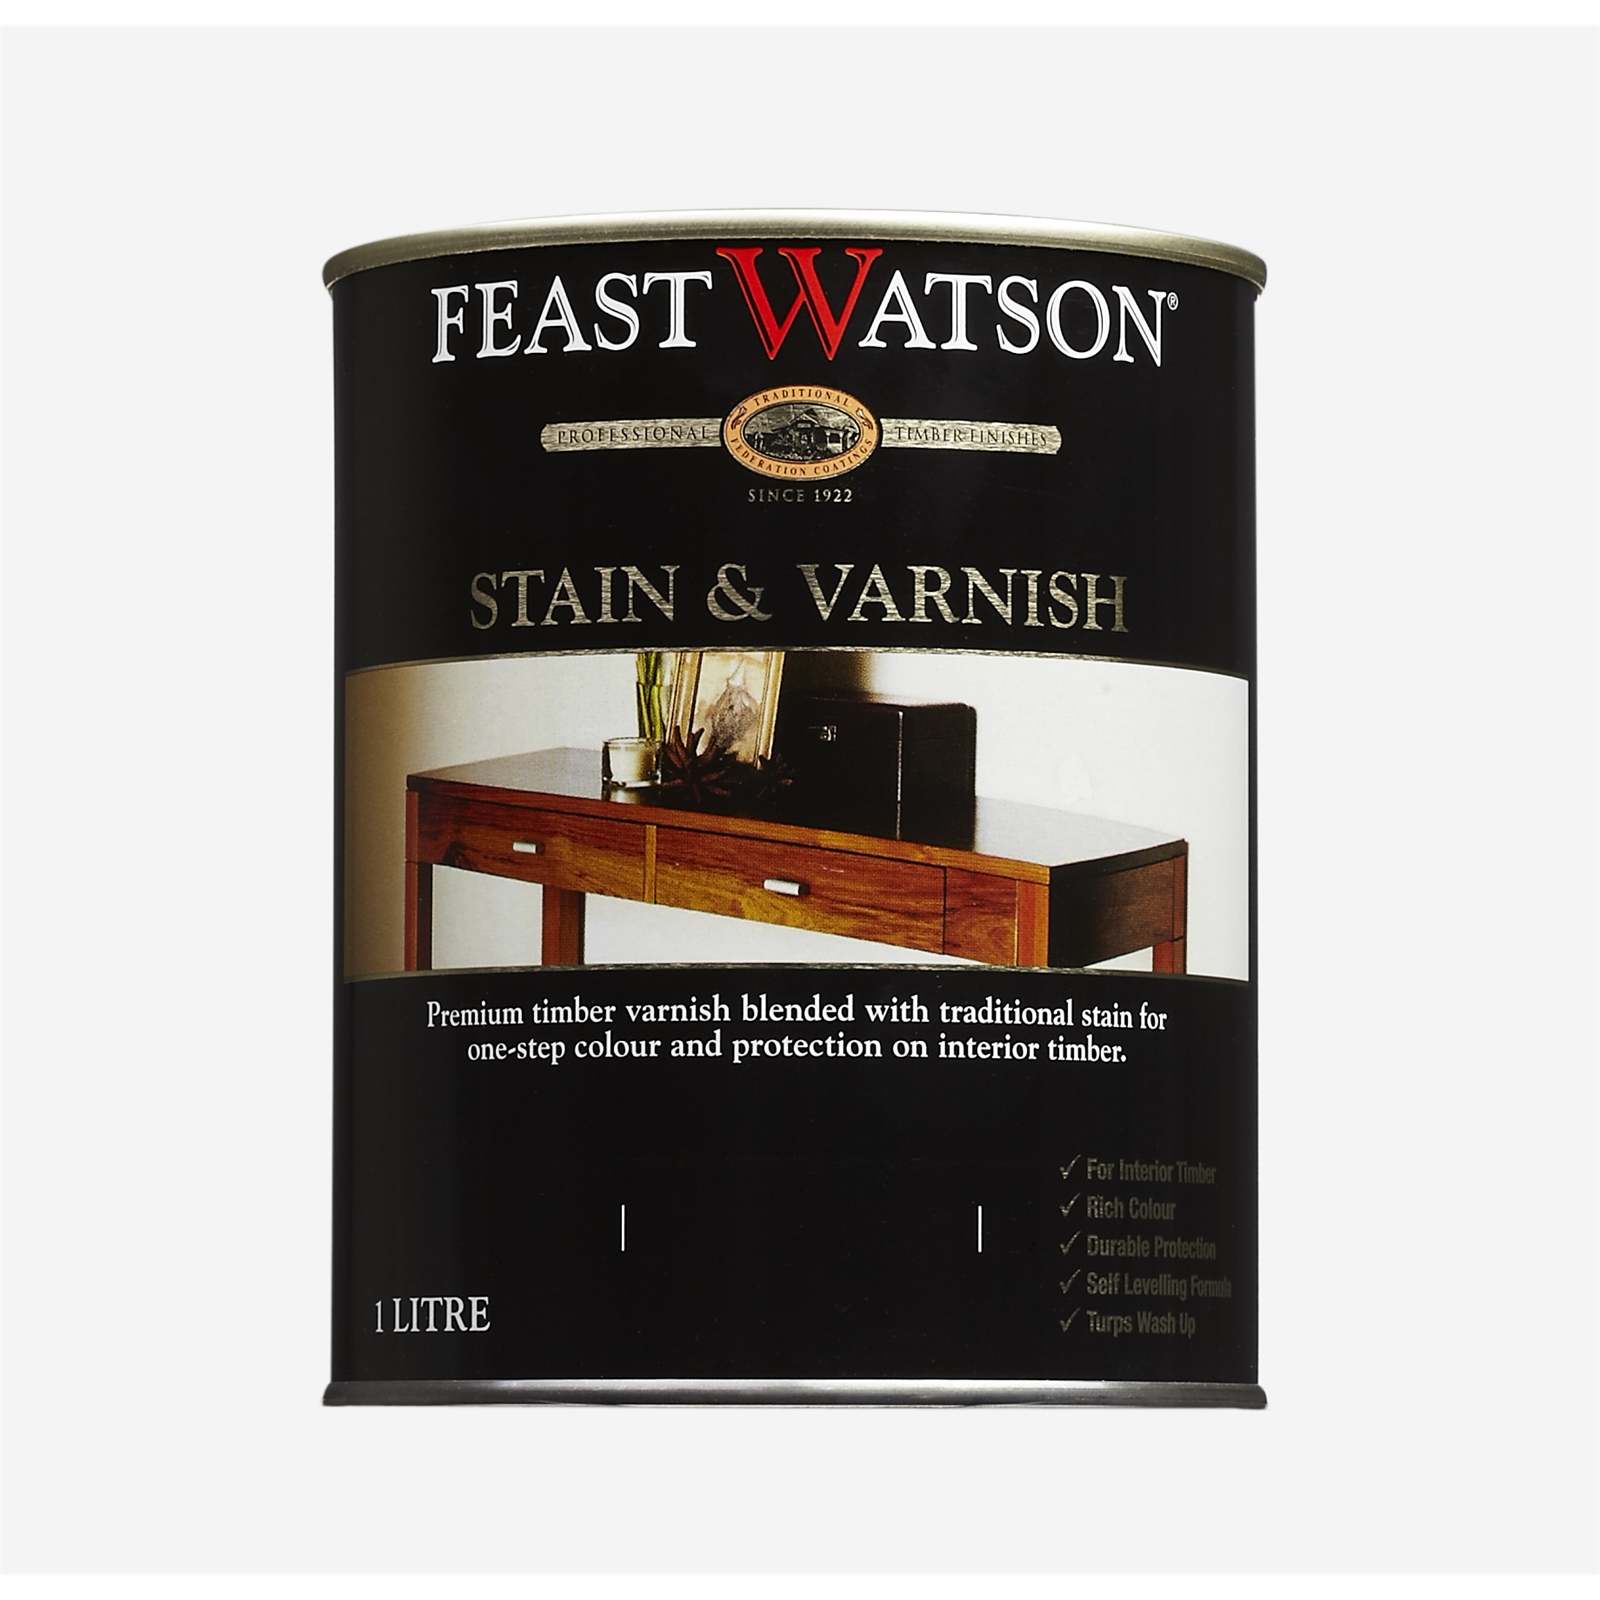 Feast Watson 1L Gloss Rich Jarrah Stain And Varnish